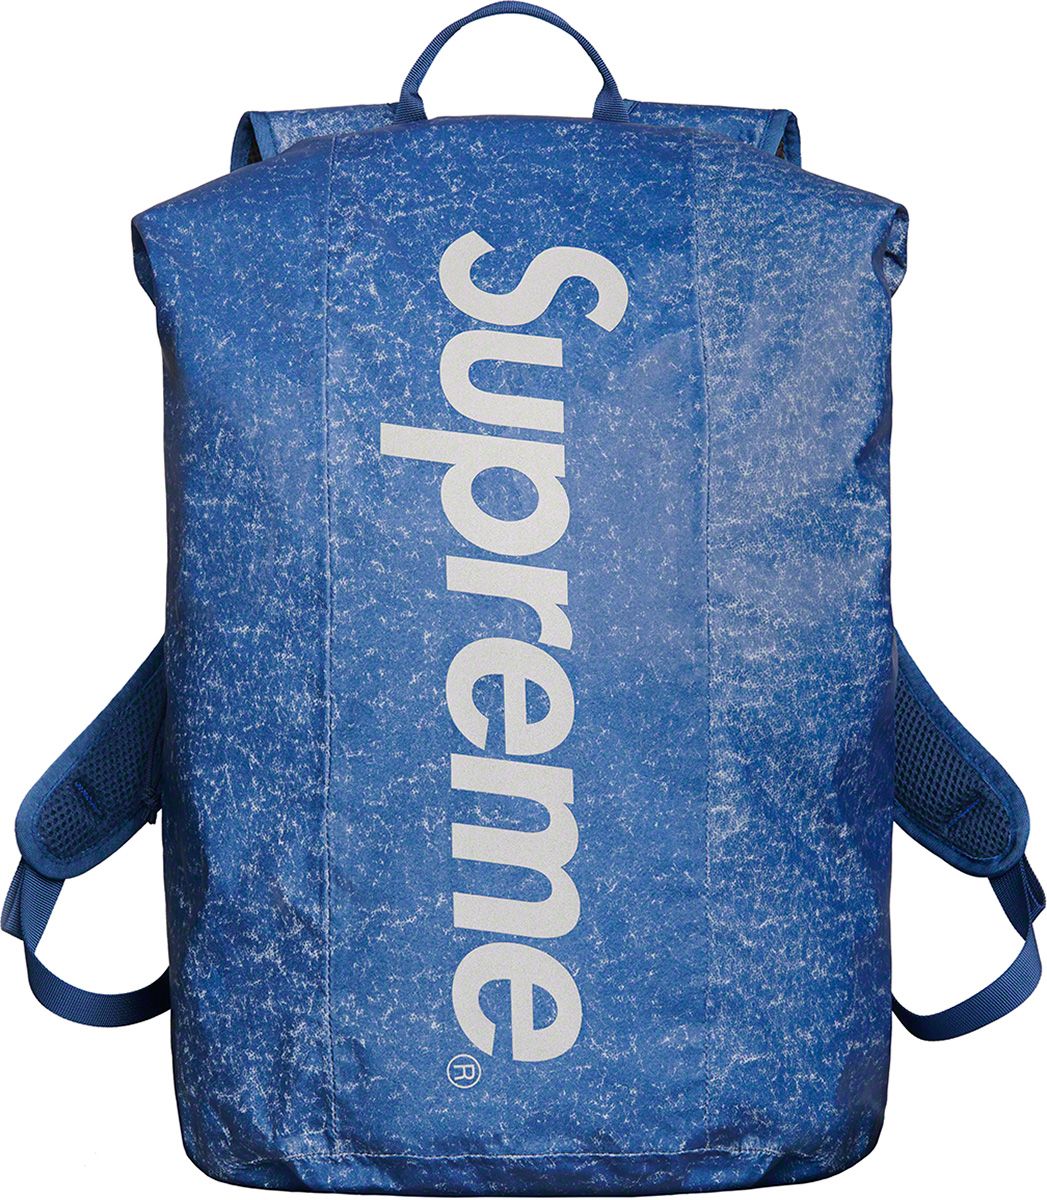 Waterproof Reflective Speckled Backpack - Fall/Winter 2020 Preview 